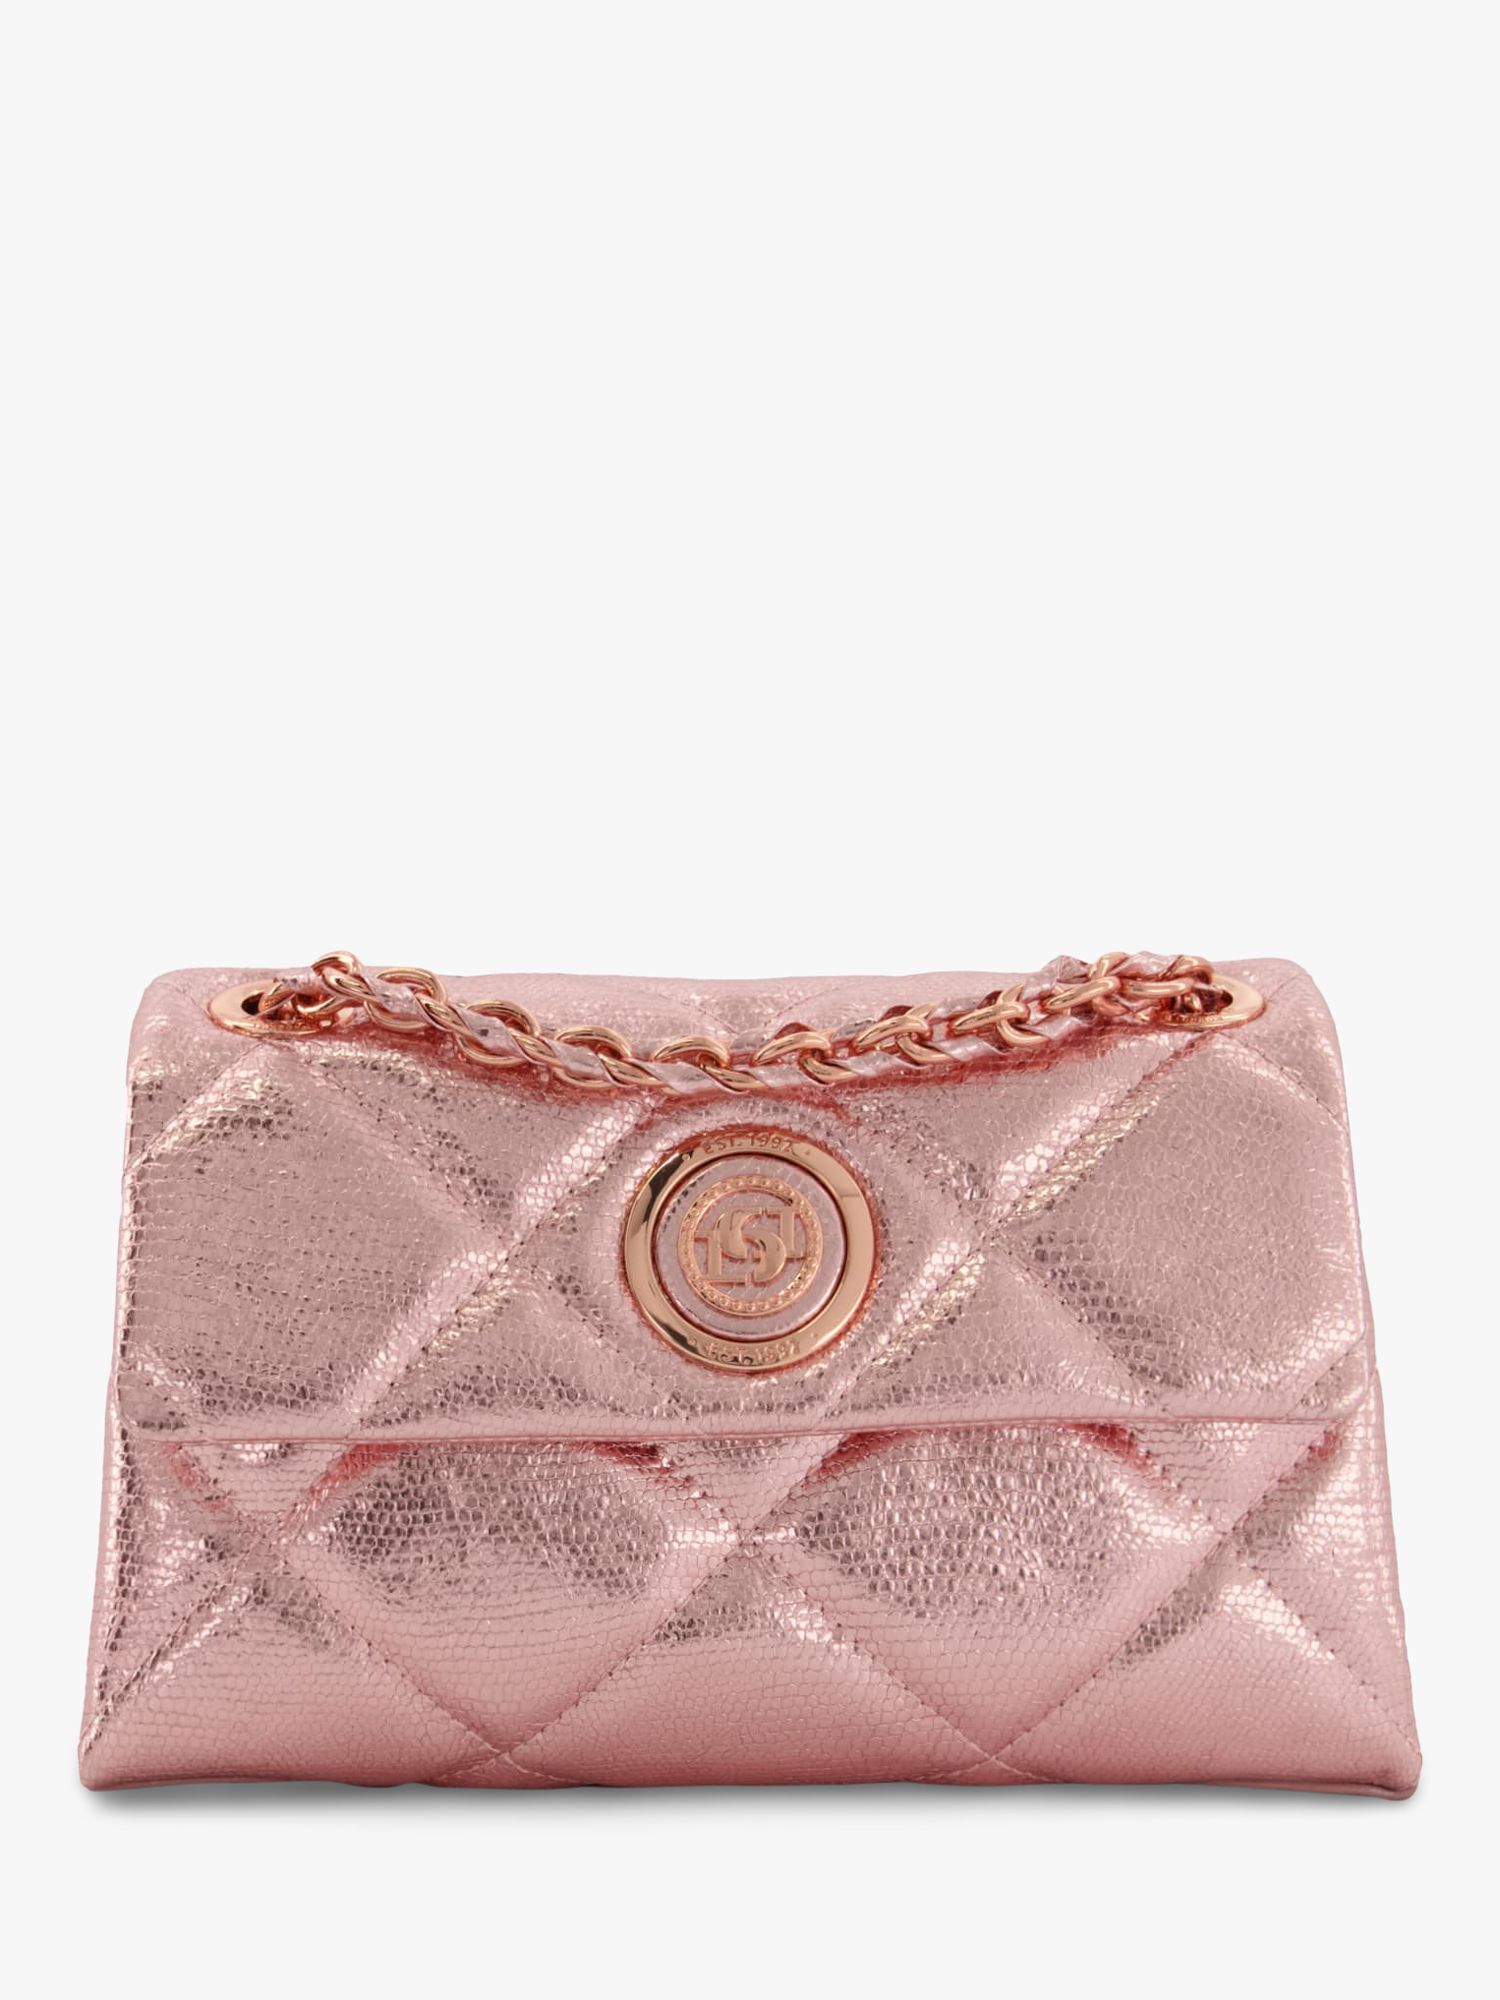 Dune Duchess Small Quilted Leather Shoulder Bag, Pink at John